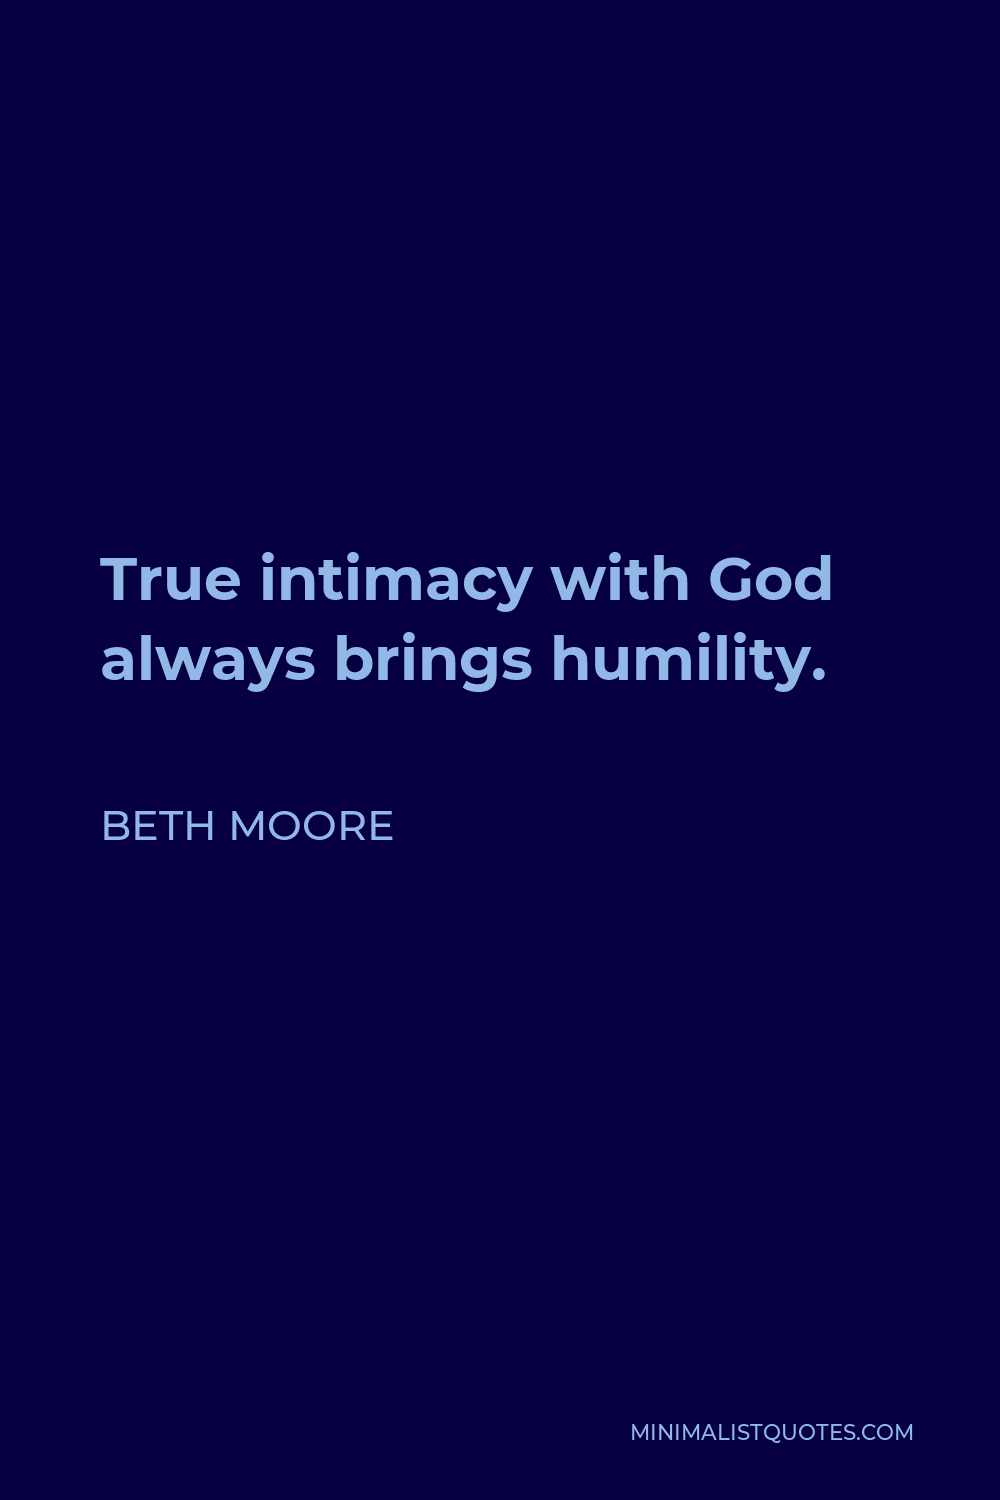 Beth Moore Quote - True intimacy with God always brings humility.